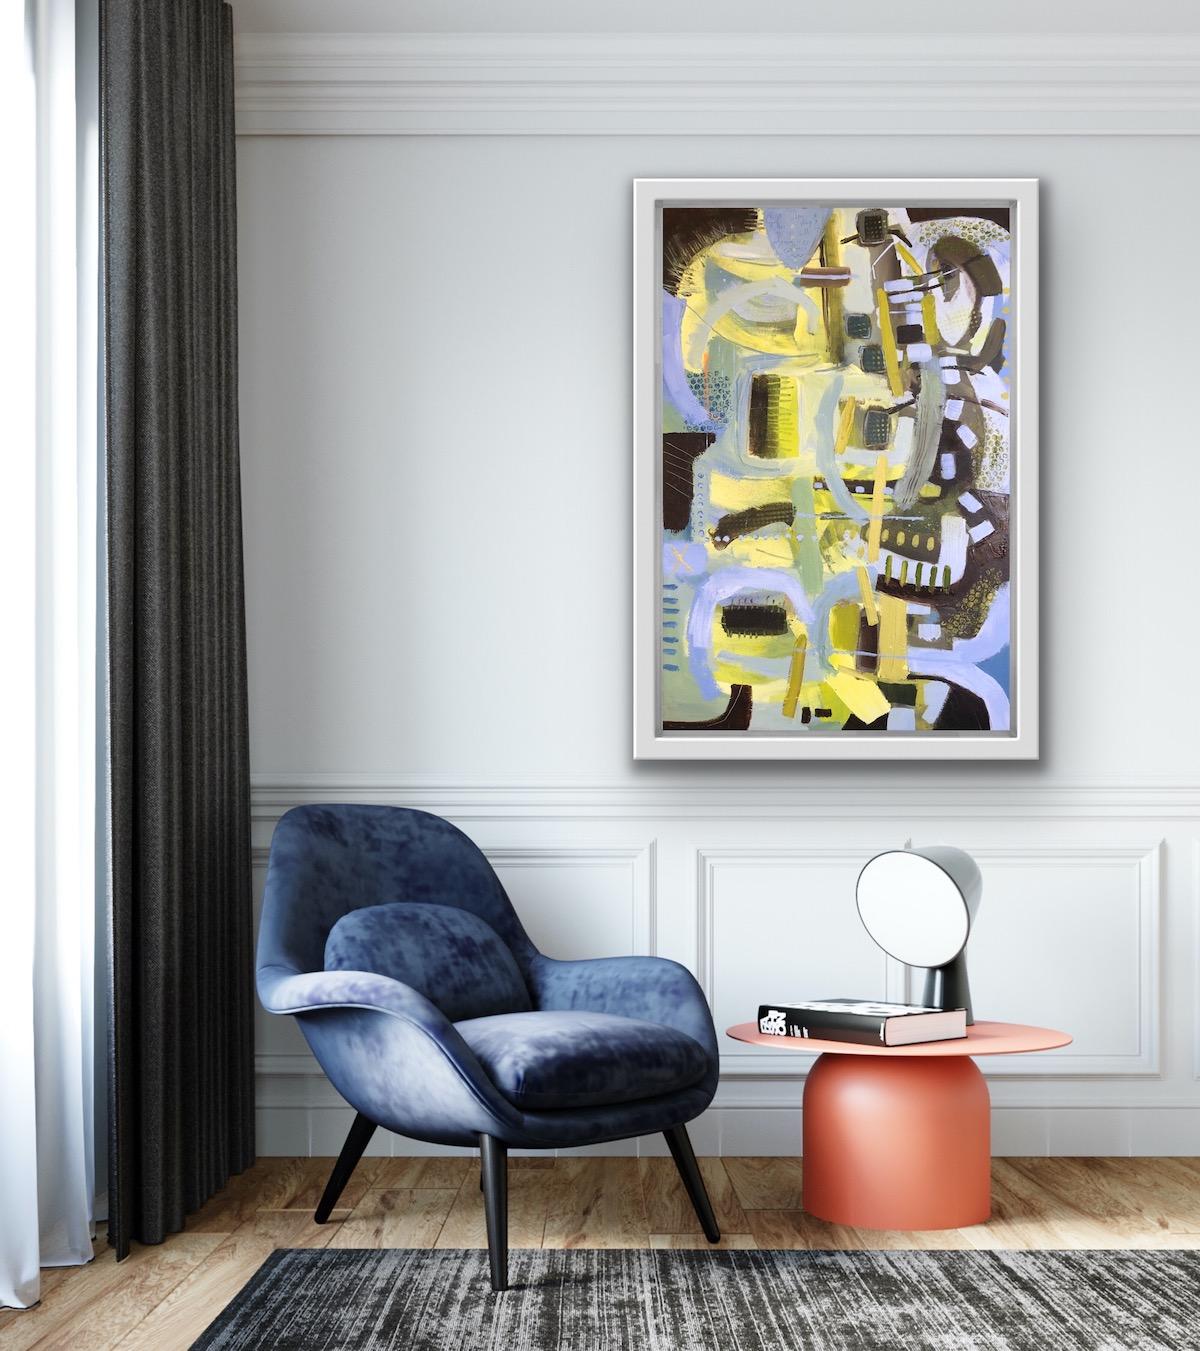 The Hill, Maggie LaPorte Banks, Original painting, contemporary art, abstract - Painting by Maggie LaPorte Banks 